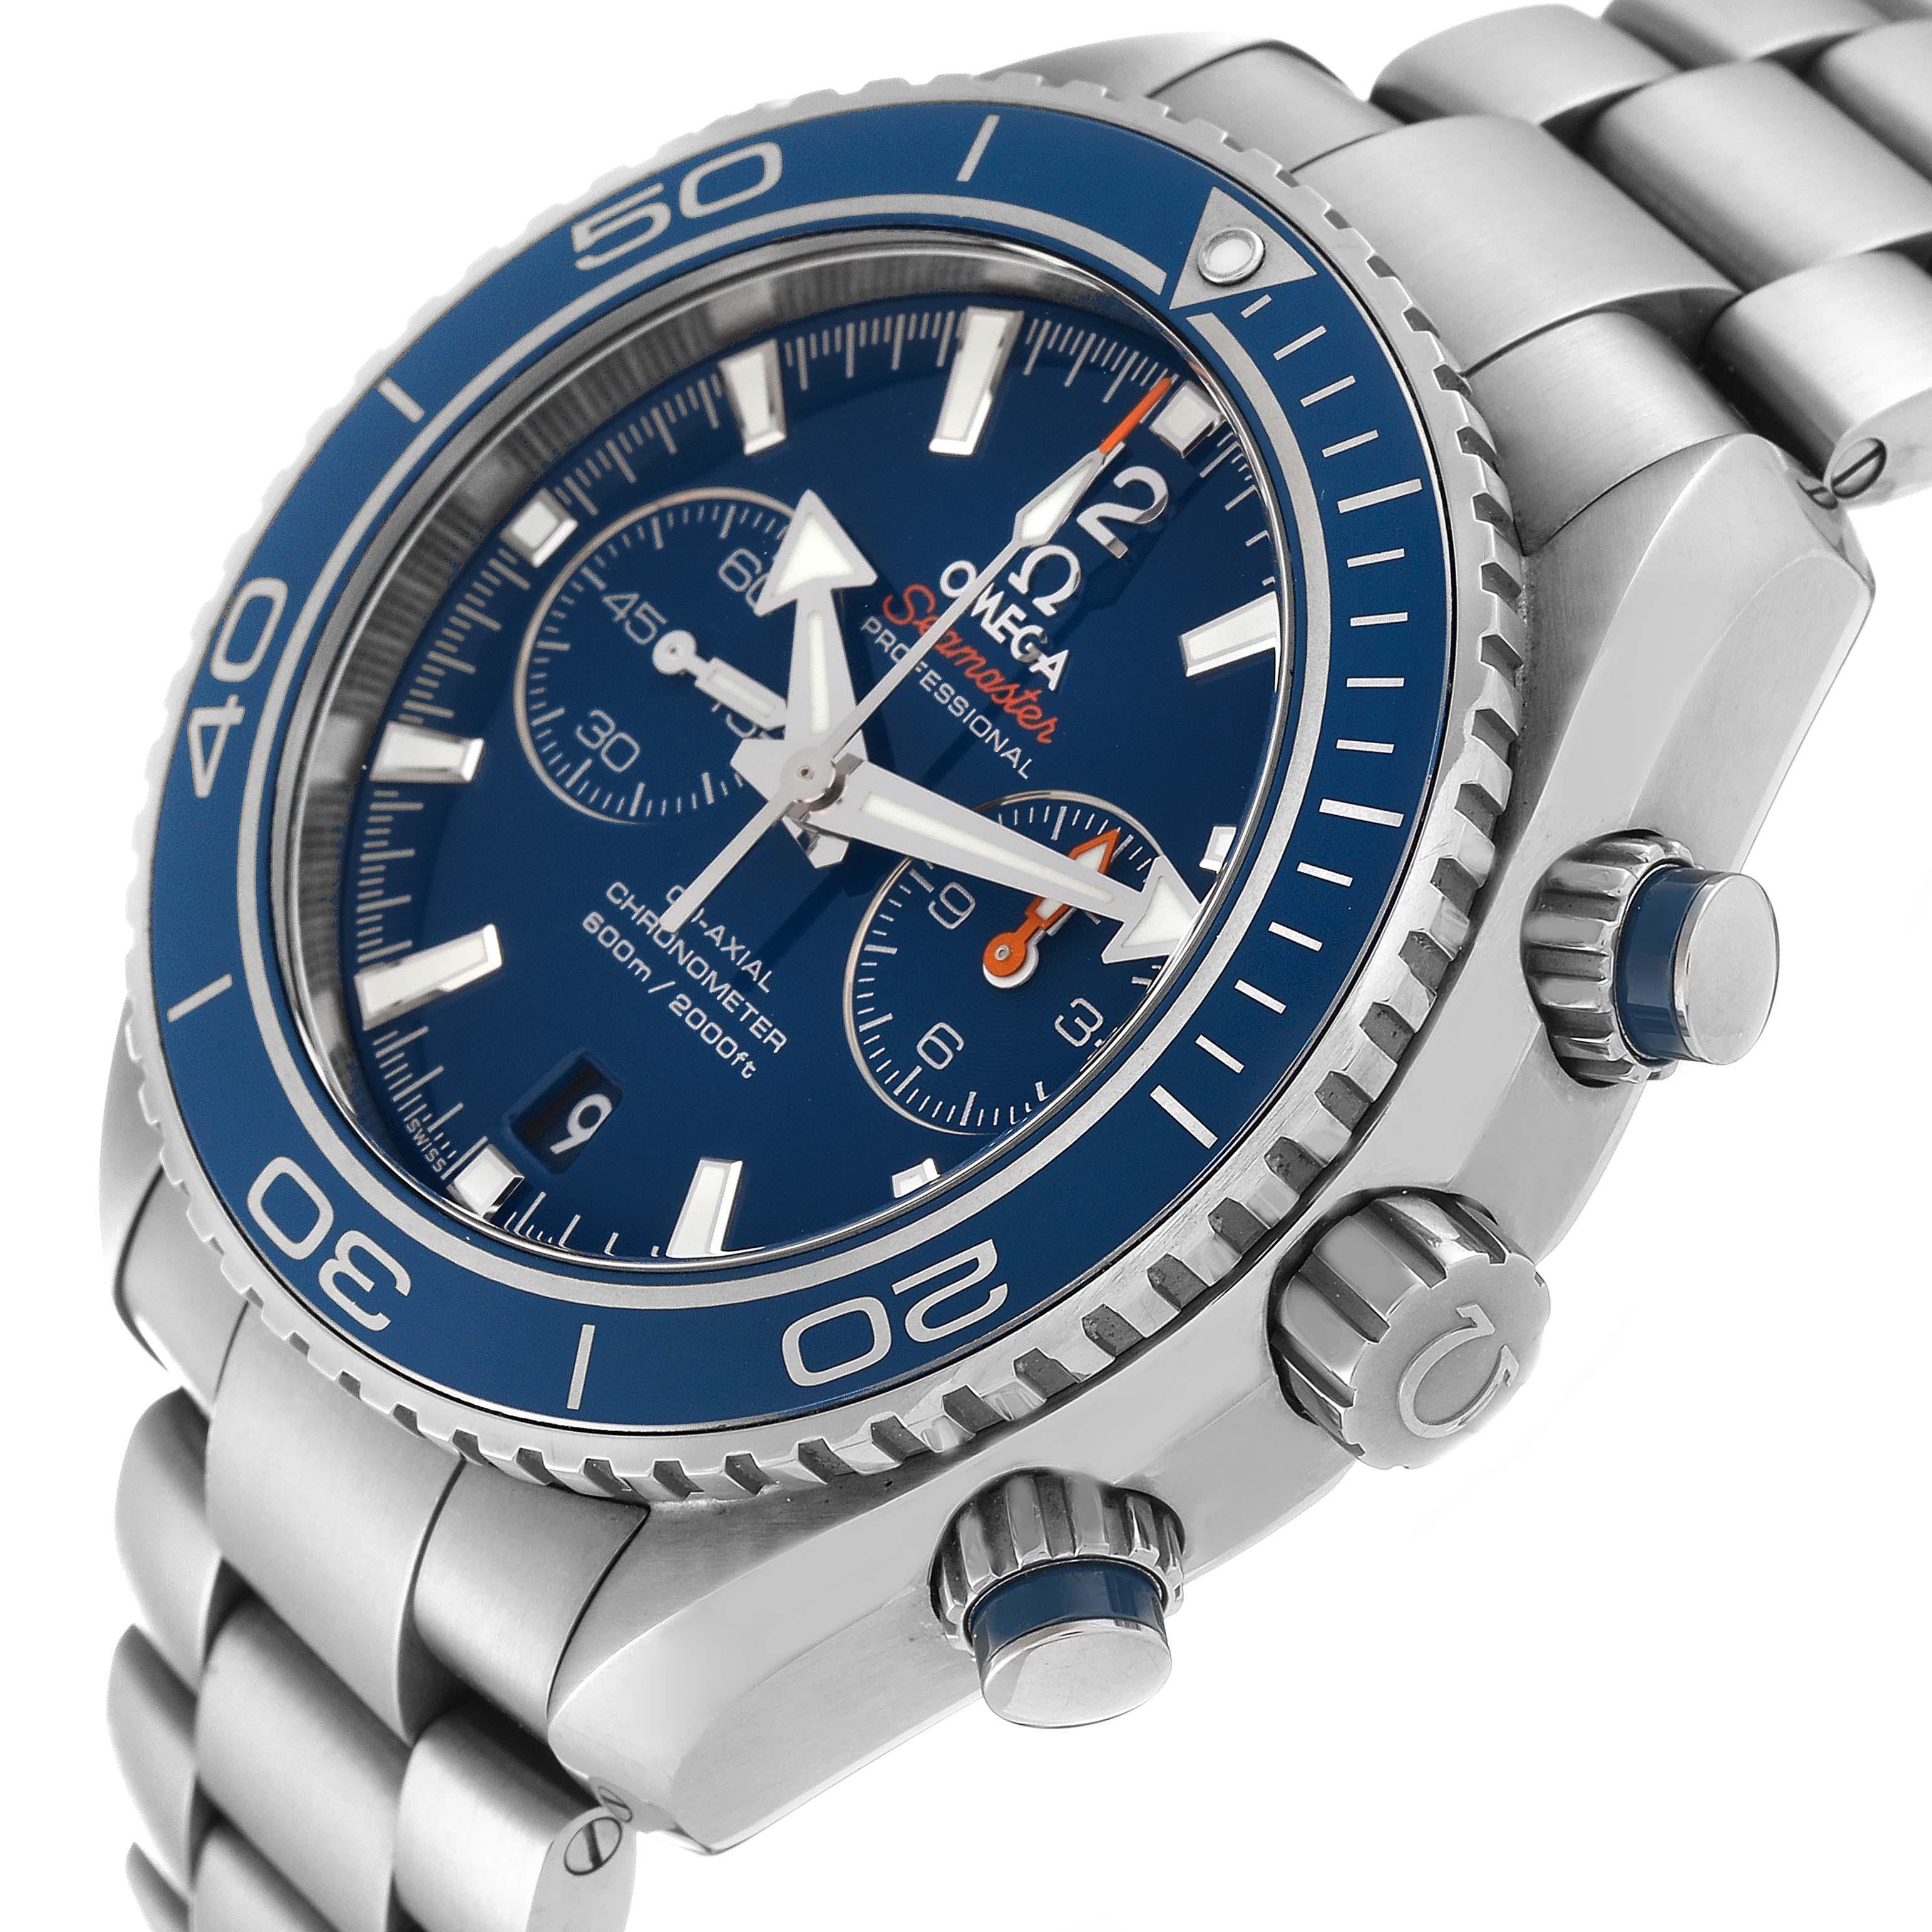 Omega Planet Ocean Chronograph Titanium Mens Watch 232.90.46.51.03.001 Box Card. Automatic self-winding chronometer movement with Co-Axial Escapement for greater precision, stability, and durability. Silicon balance spring on free sprung balance, 2